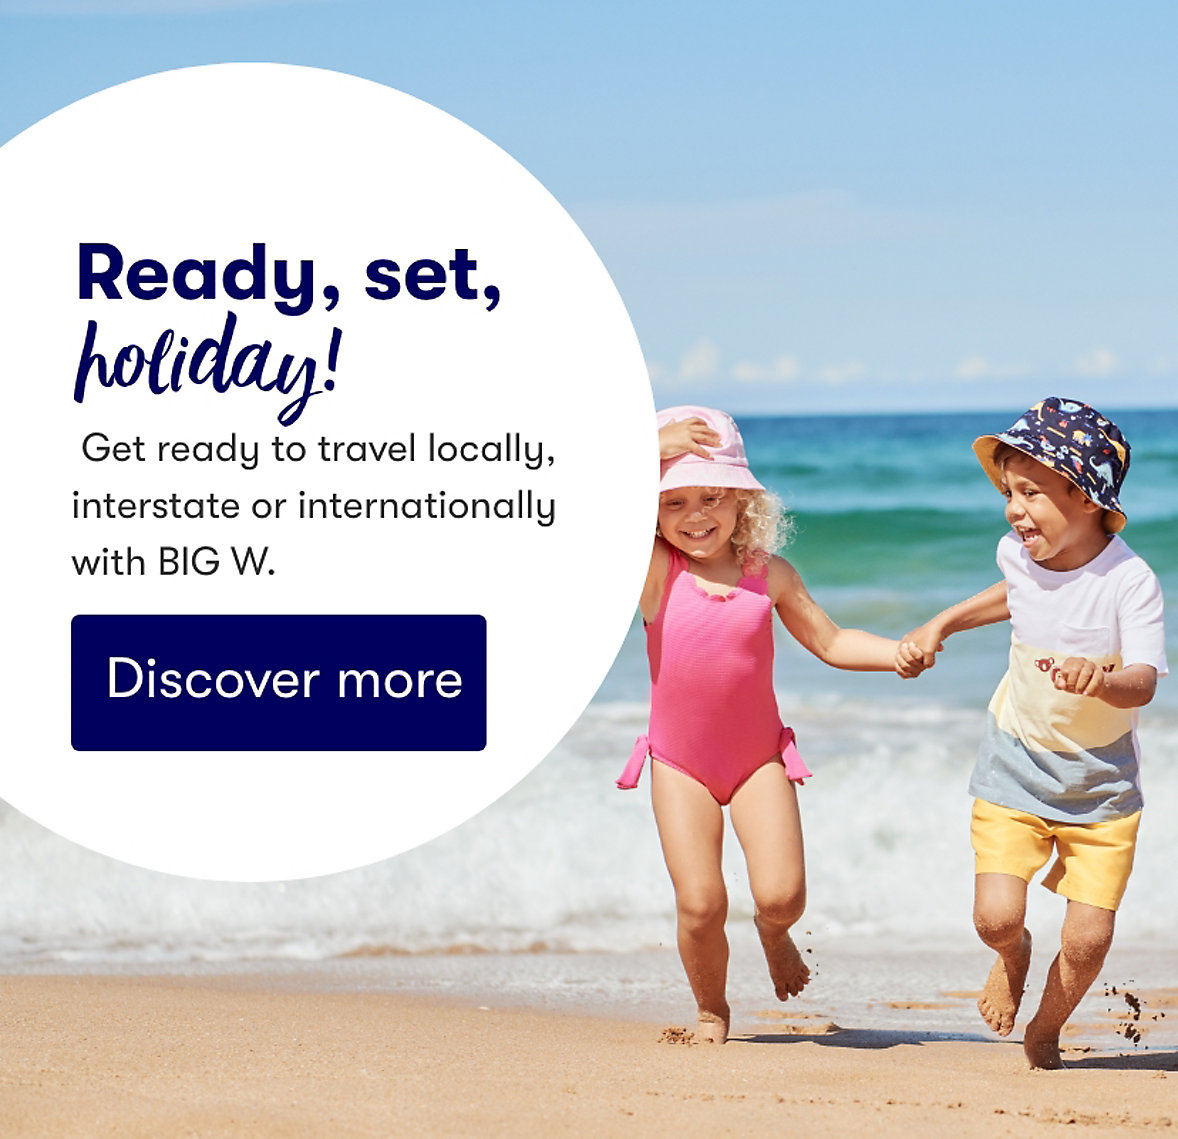 Ready, set, holiday! Everything you need for travel.